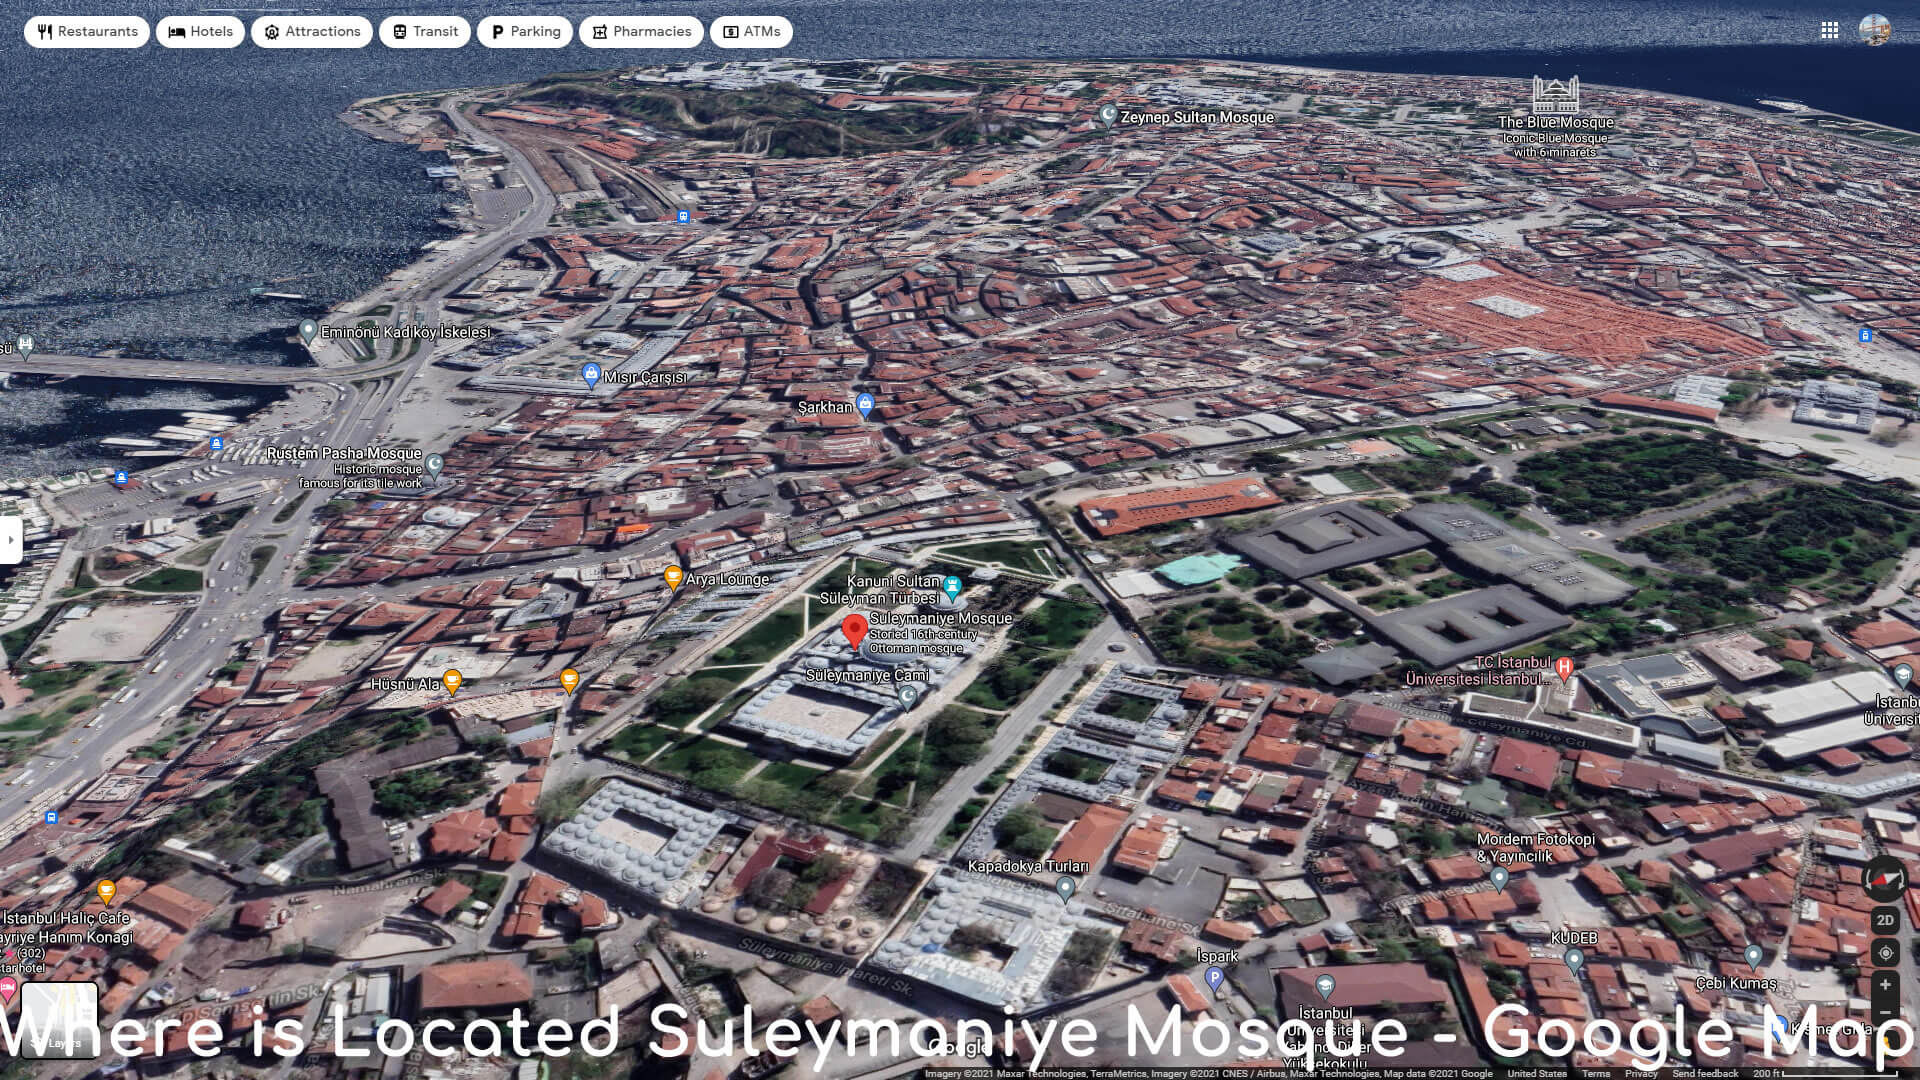 Where is Located Suleymaniye Mosque - Google Map